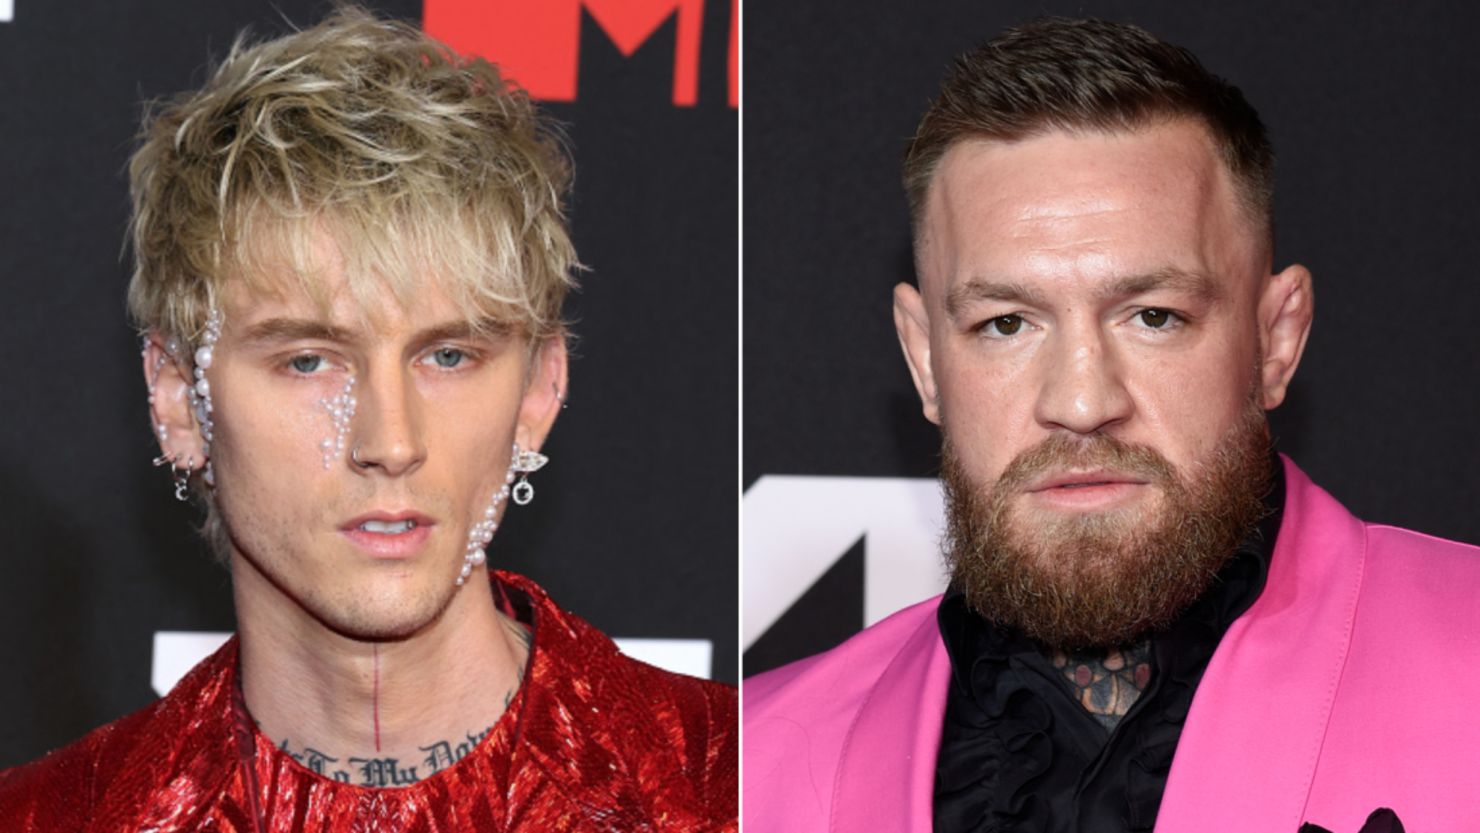 Machine Gun Kelly and Conor McGregor were both at the VMAs on Sunday.